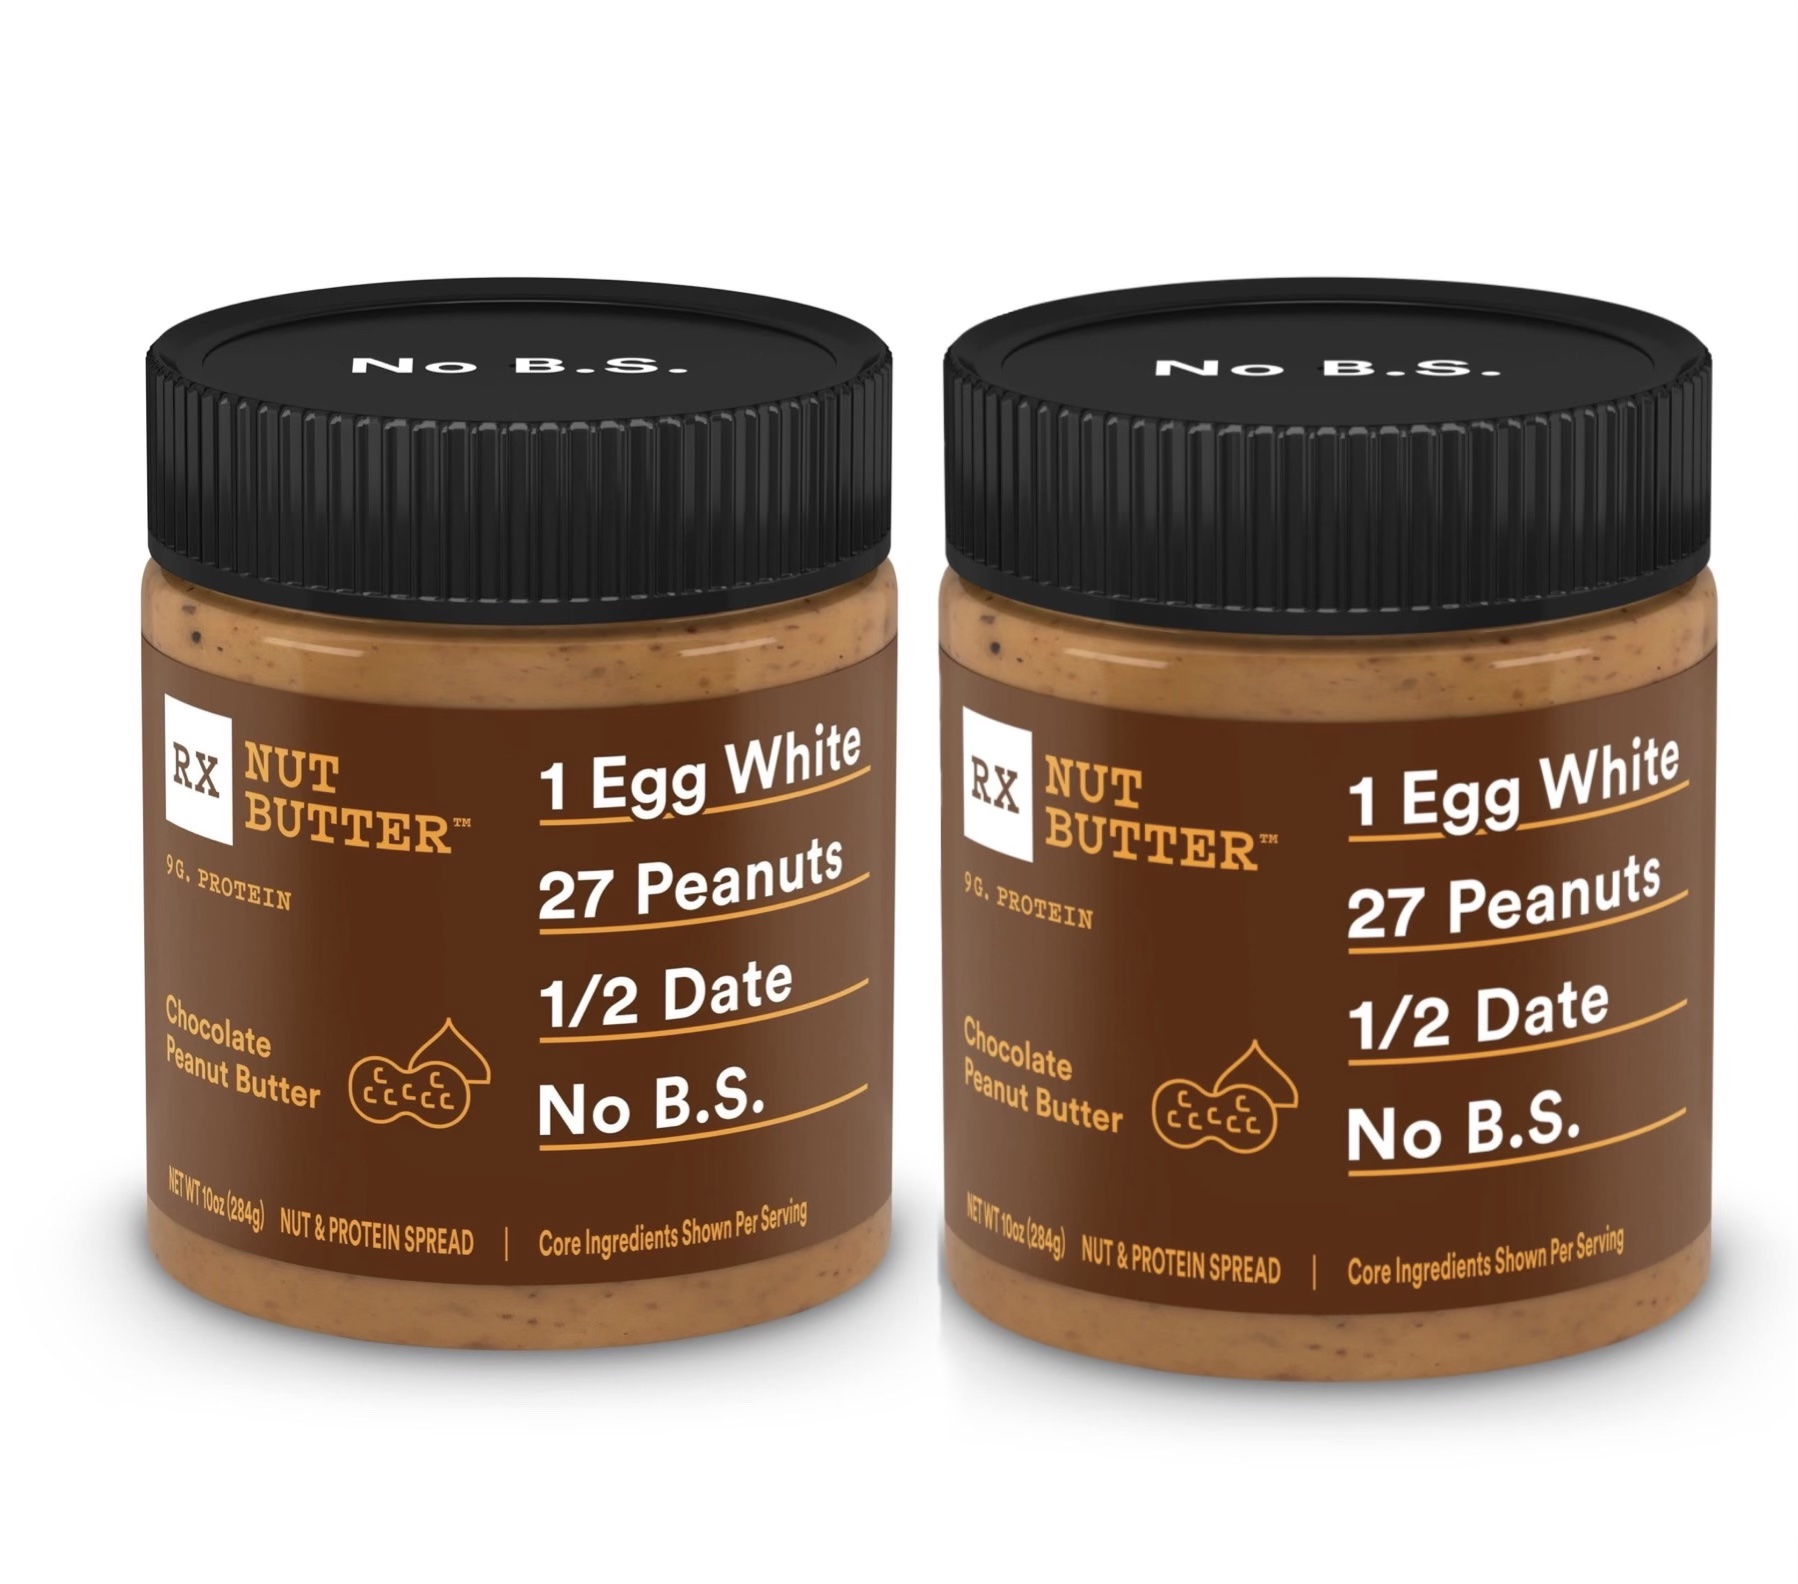 2-Pack 10-oz. RX Nut Butter (Chocolate Peanut Butter) $10.50 ($5.25 ea)  w/ S&S + Free Shipping w/ Prime or $25+